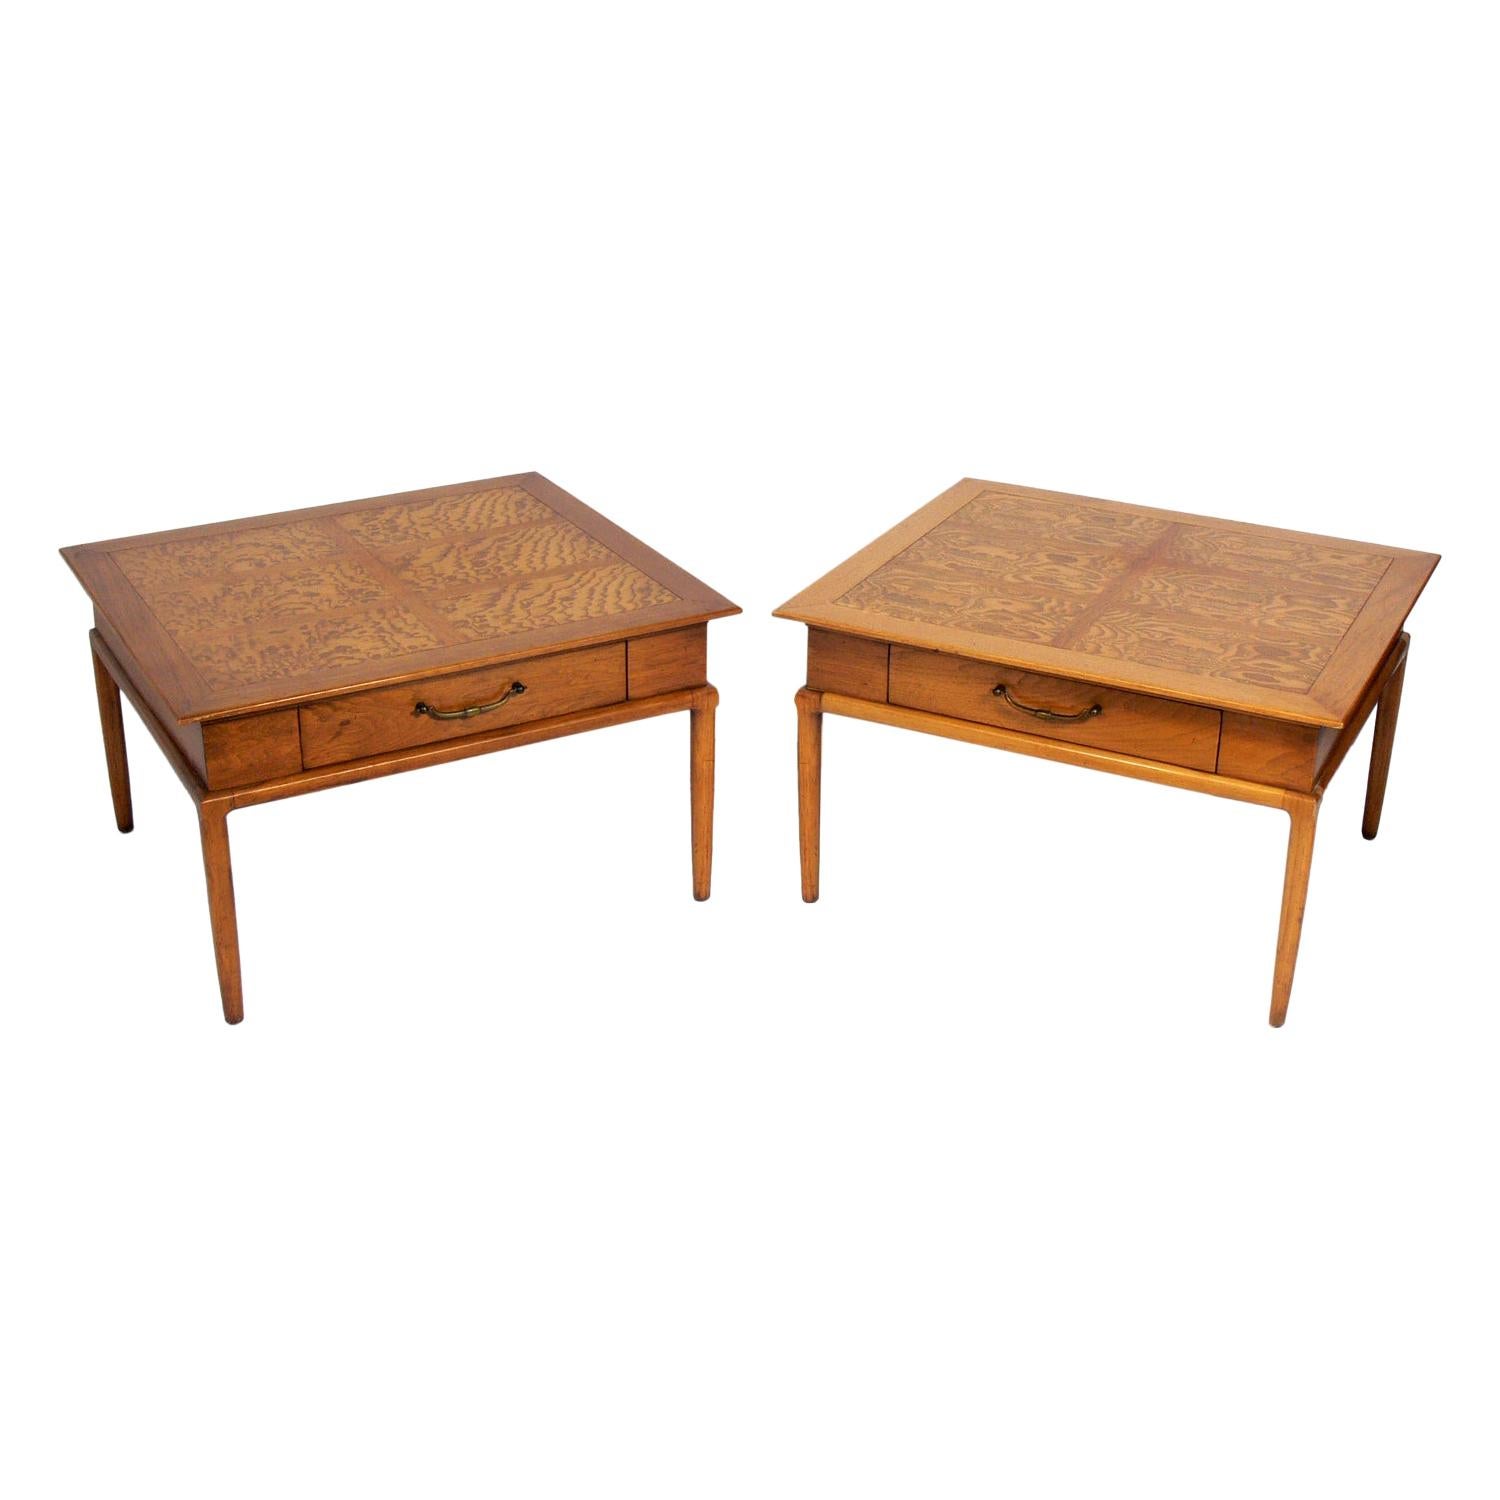 Pair of Large Scale End Tables by Lubberts & Mulder for Tomlinson